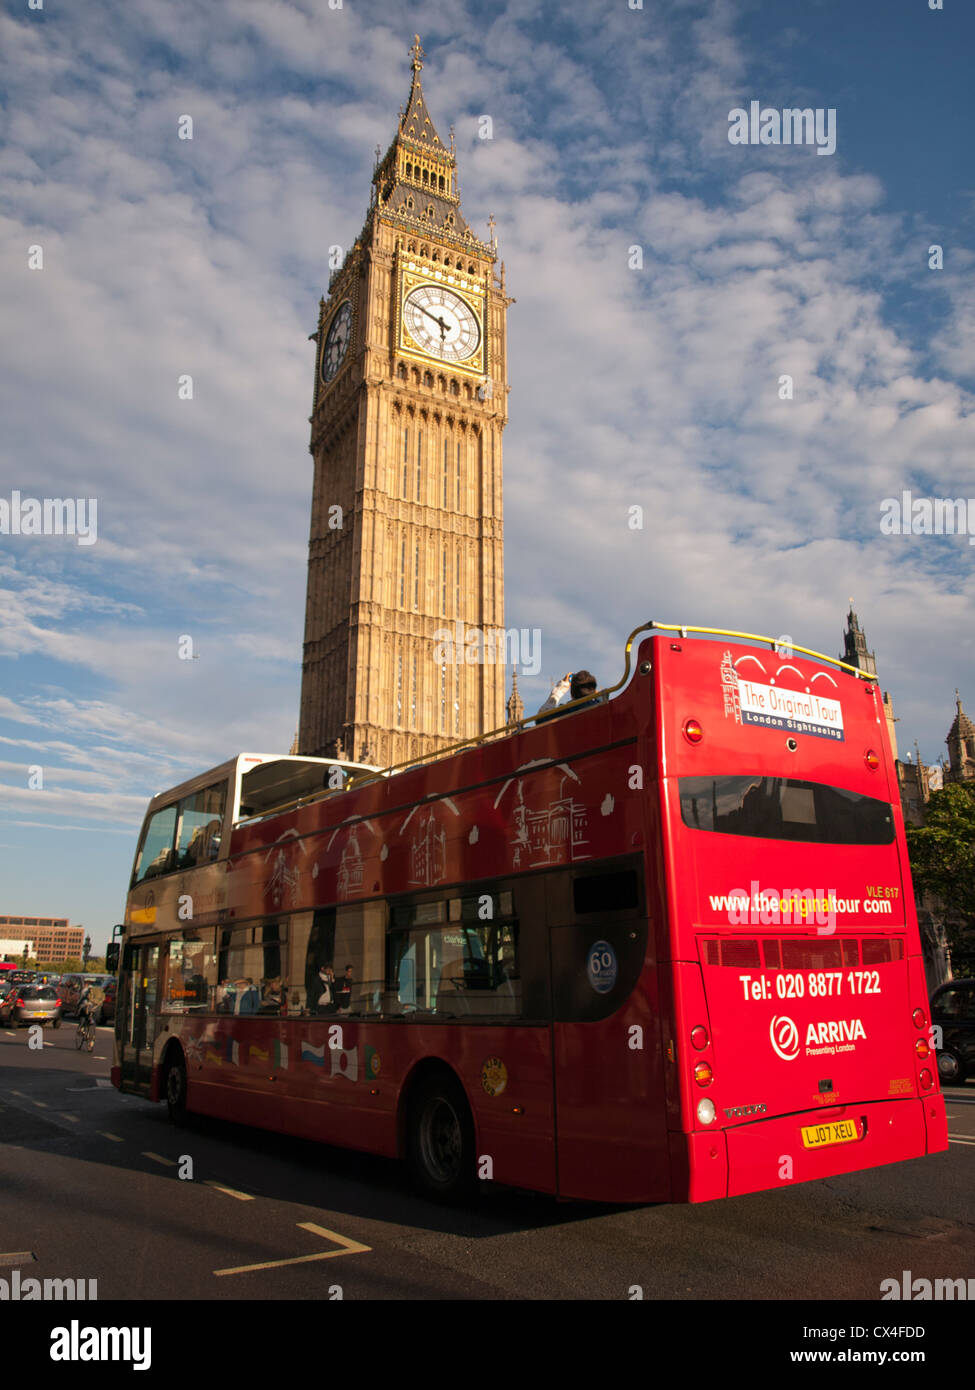 Tour bus approaching Big Ben clock tower, Palace of Westminster (Houses of Parliament), City of Westminster, London, England, UK Stock Photo